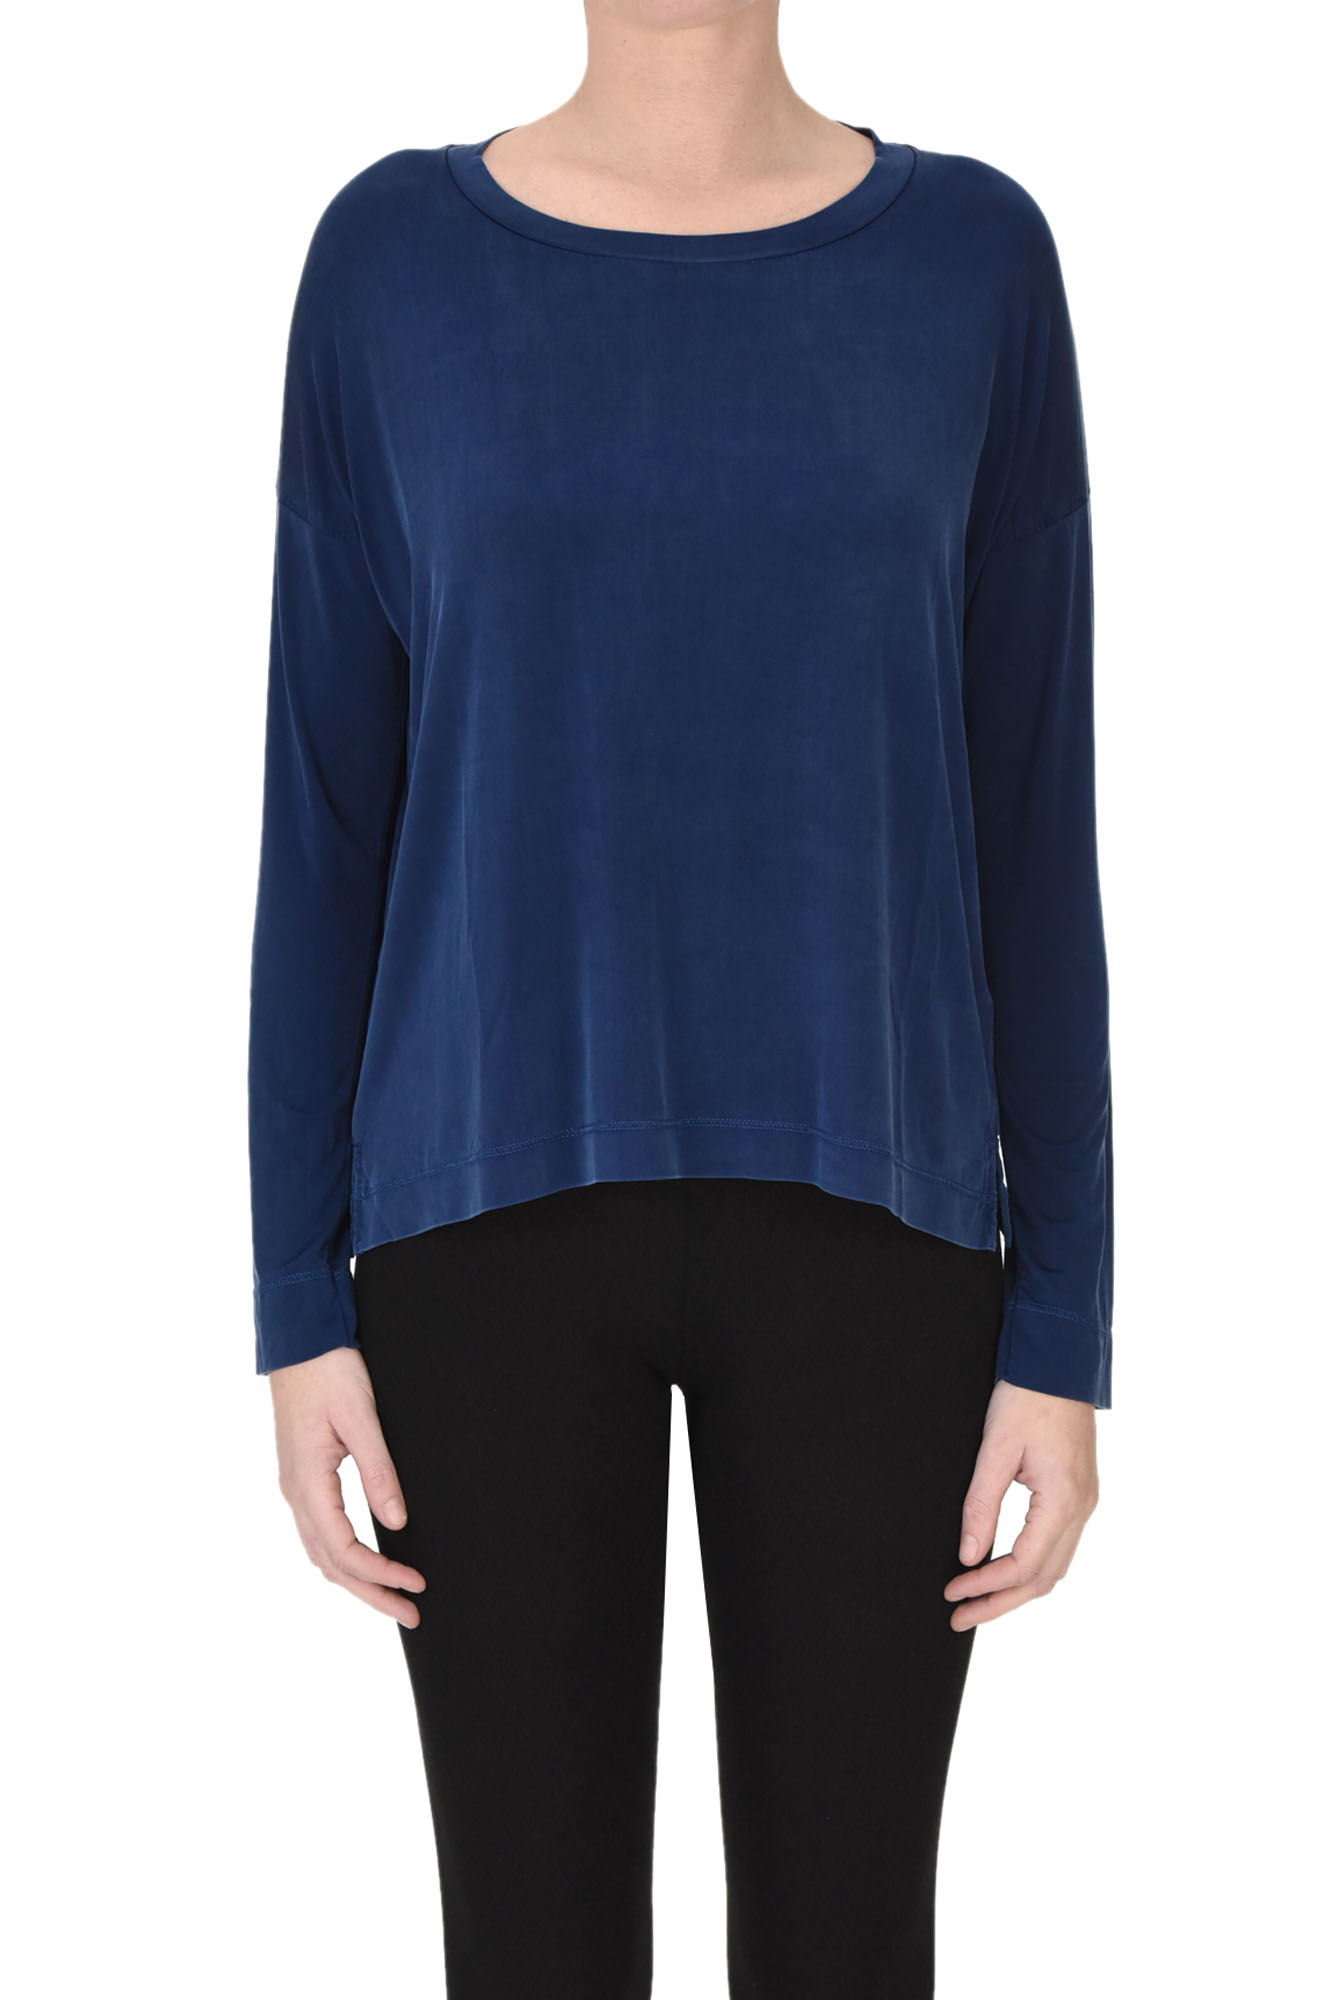 Shop Wool & Co Long Sleeves Cupro T-shirt In Navy Blue